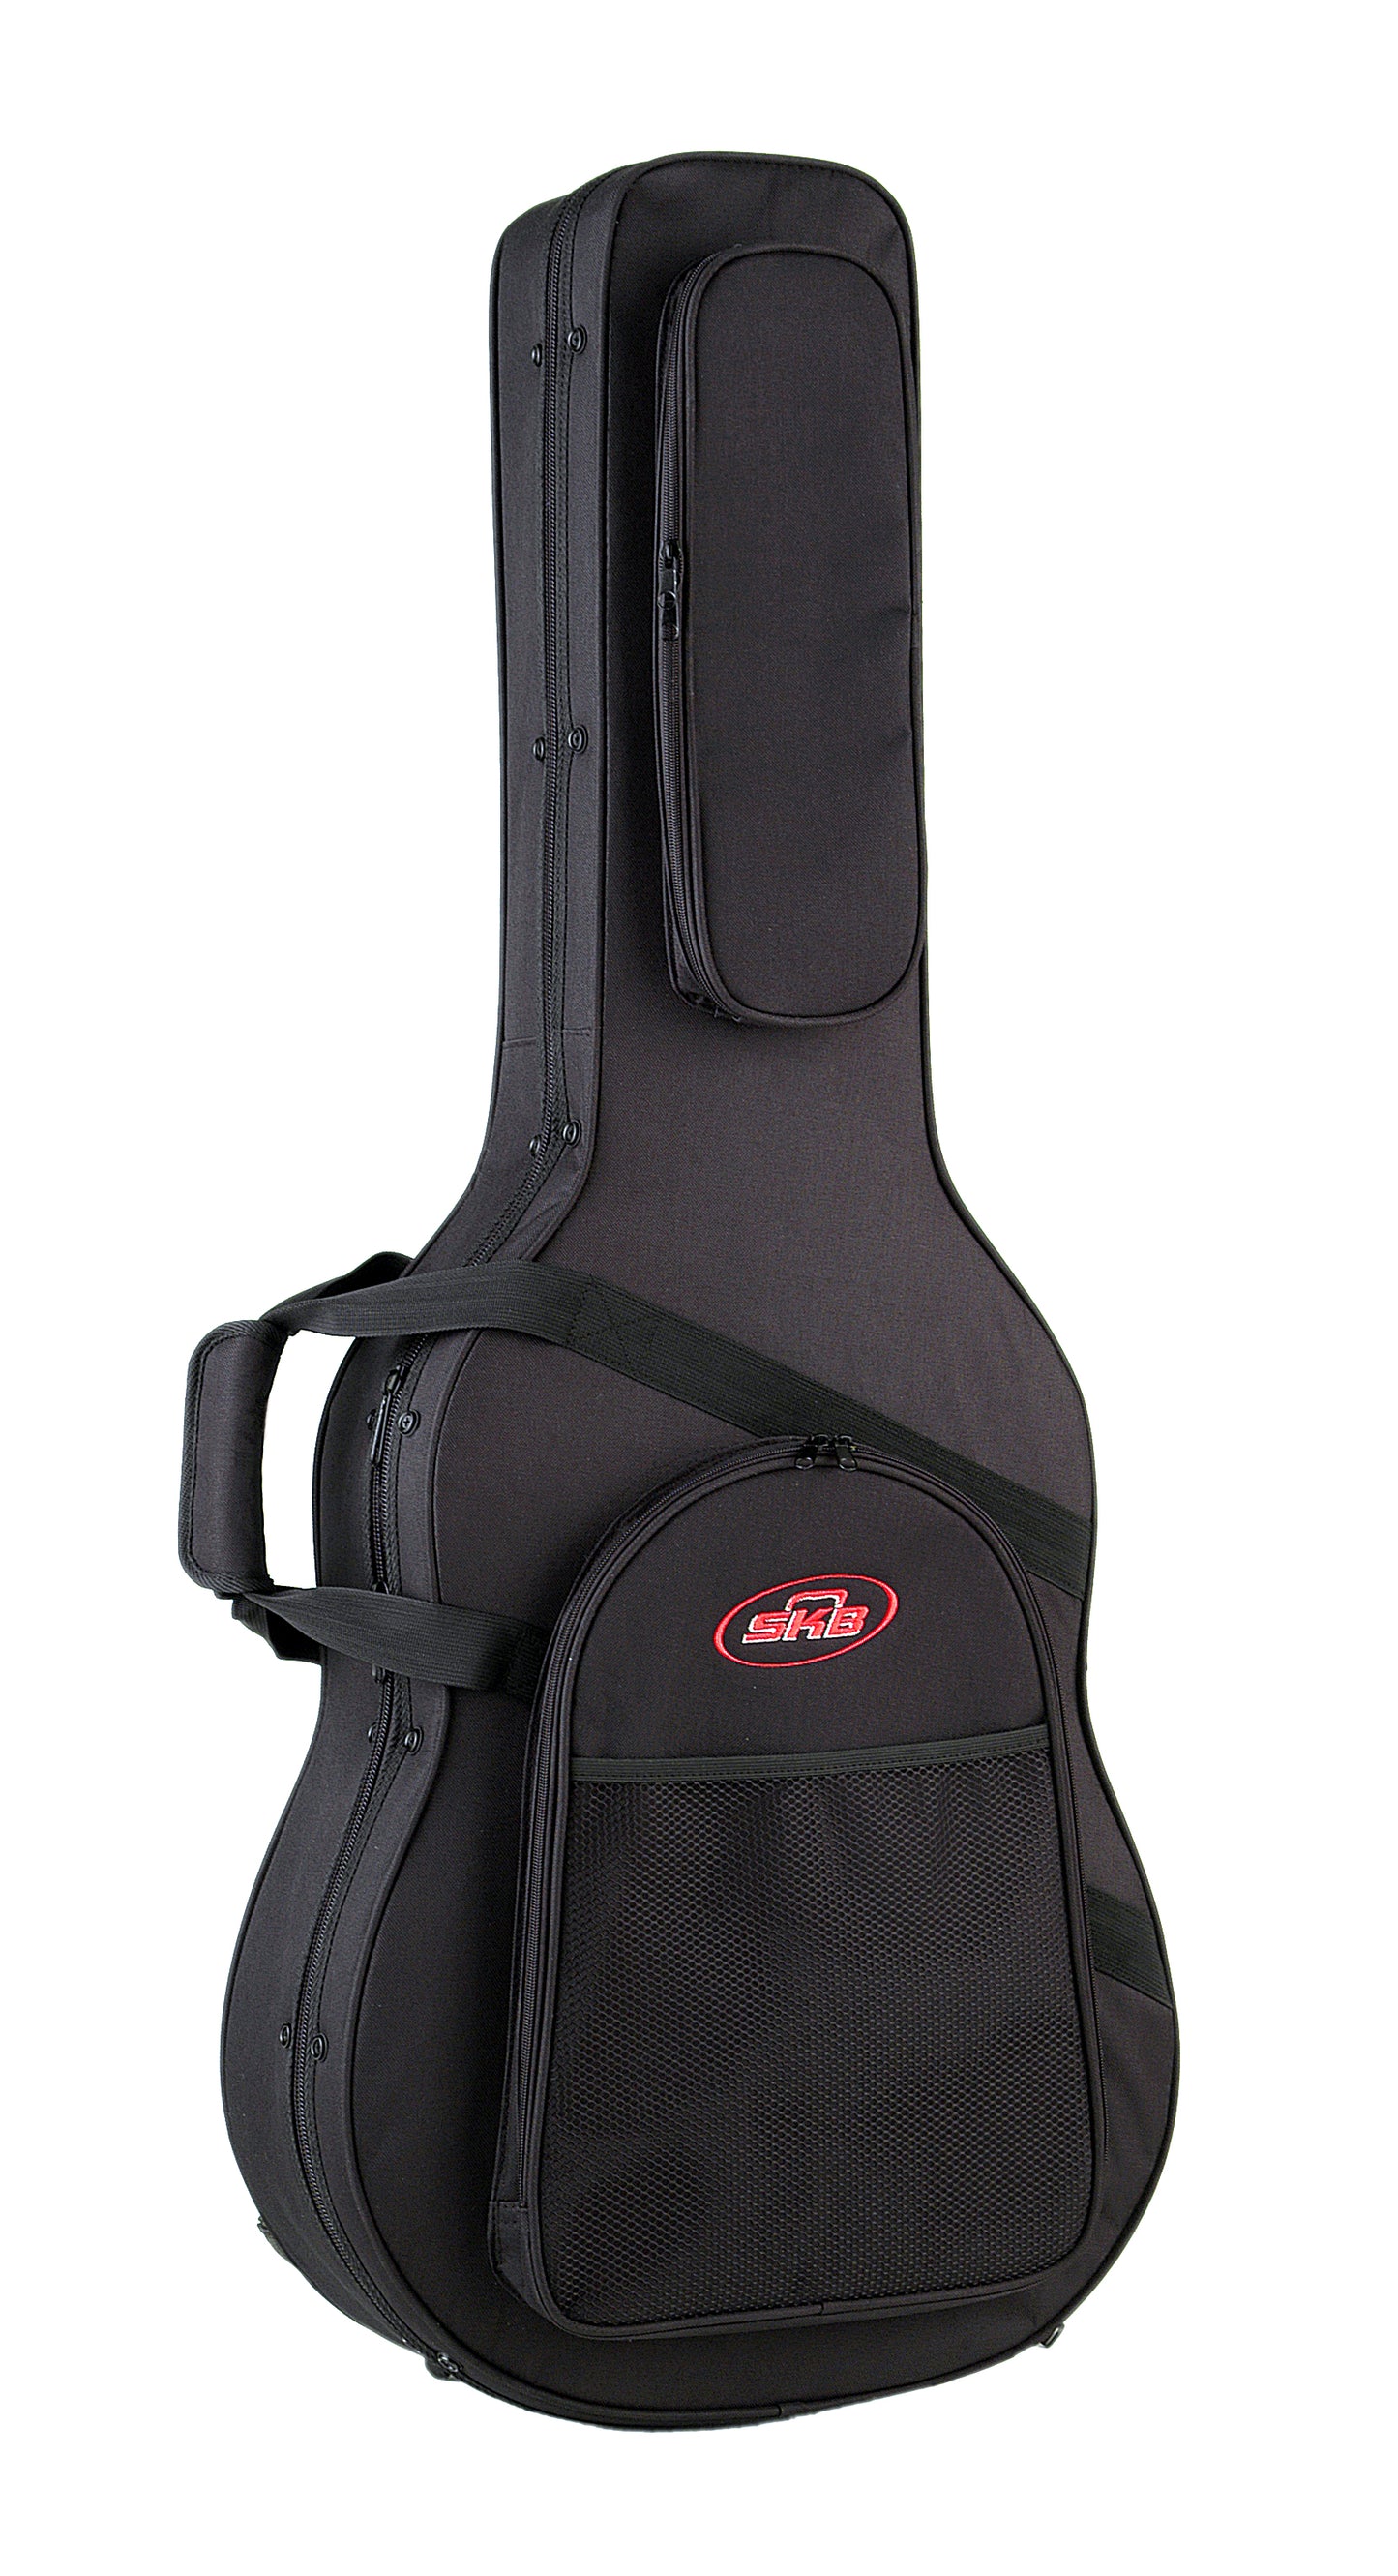 SKB Guitar Soft Case for Dreadnought, Parlor including the Taylor GS Mini